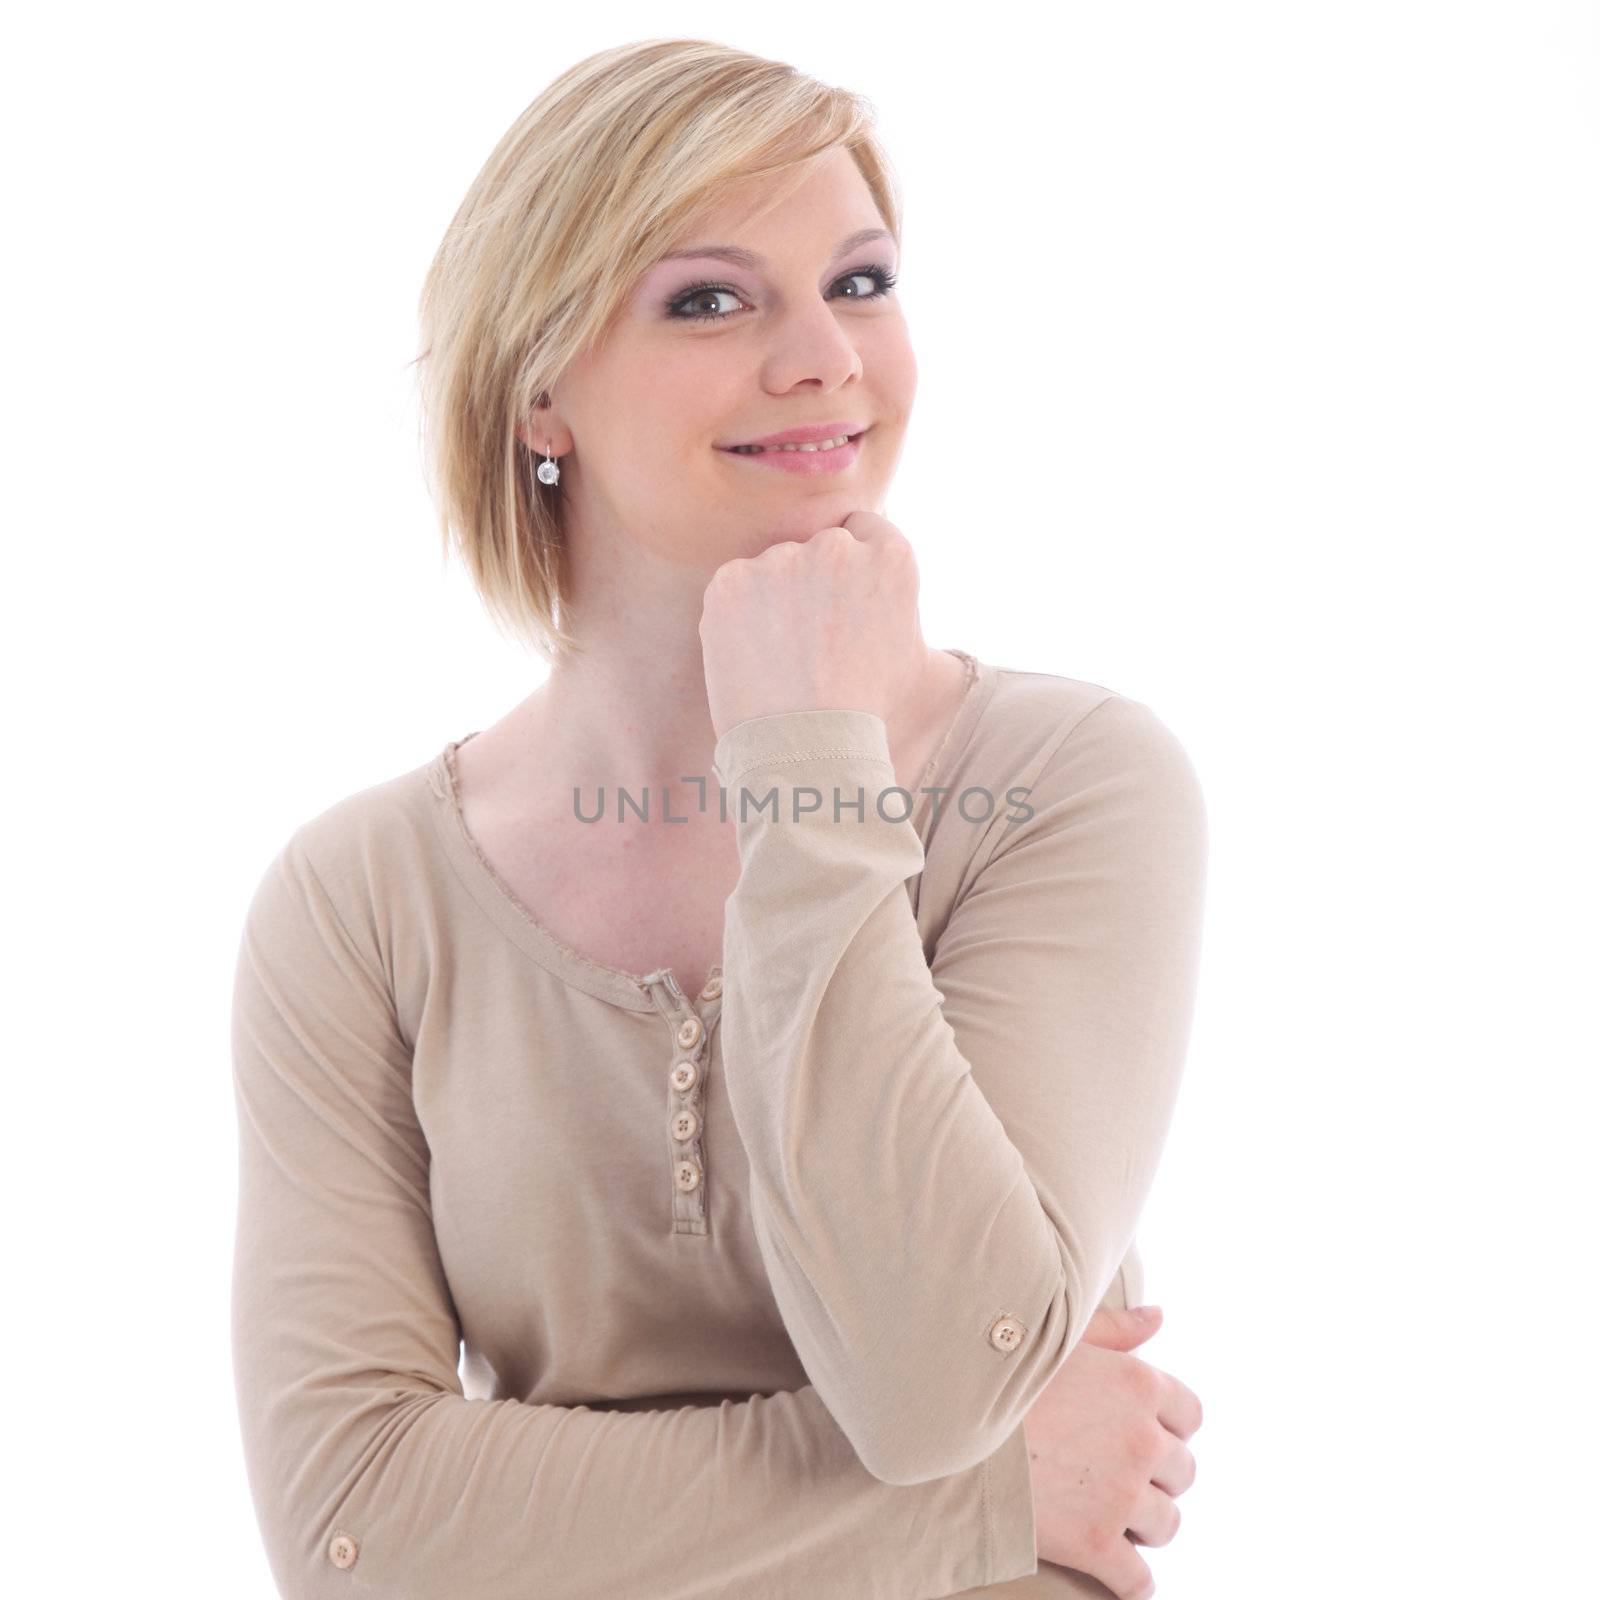 Attractive young woman smiling as she stands thinking with her chin resting on her hand isolated on white